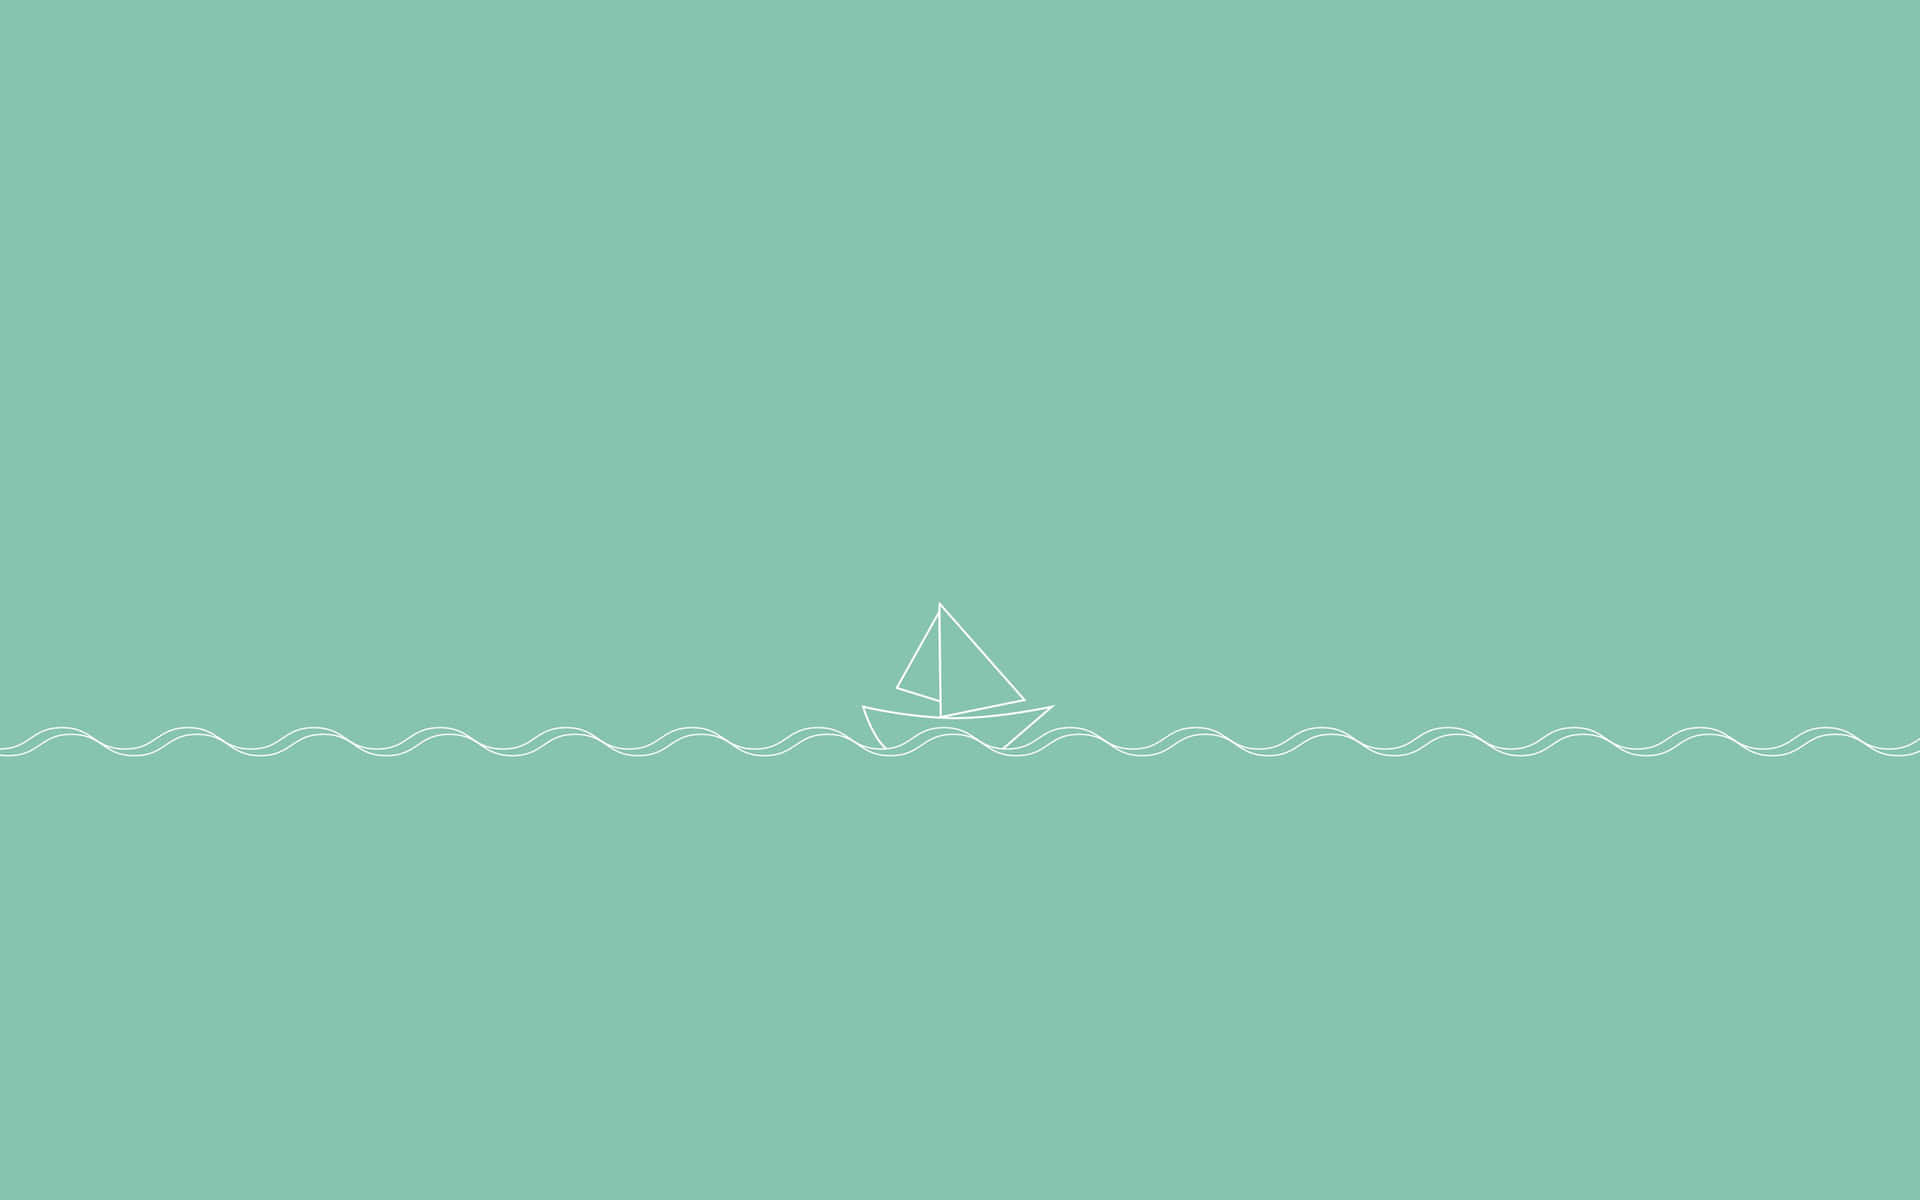 A peaceful ocean scene with a solitary boat Wallpaper